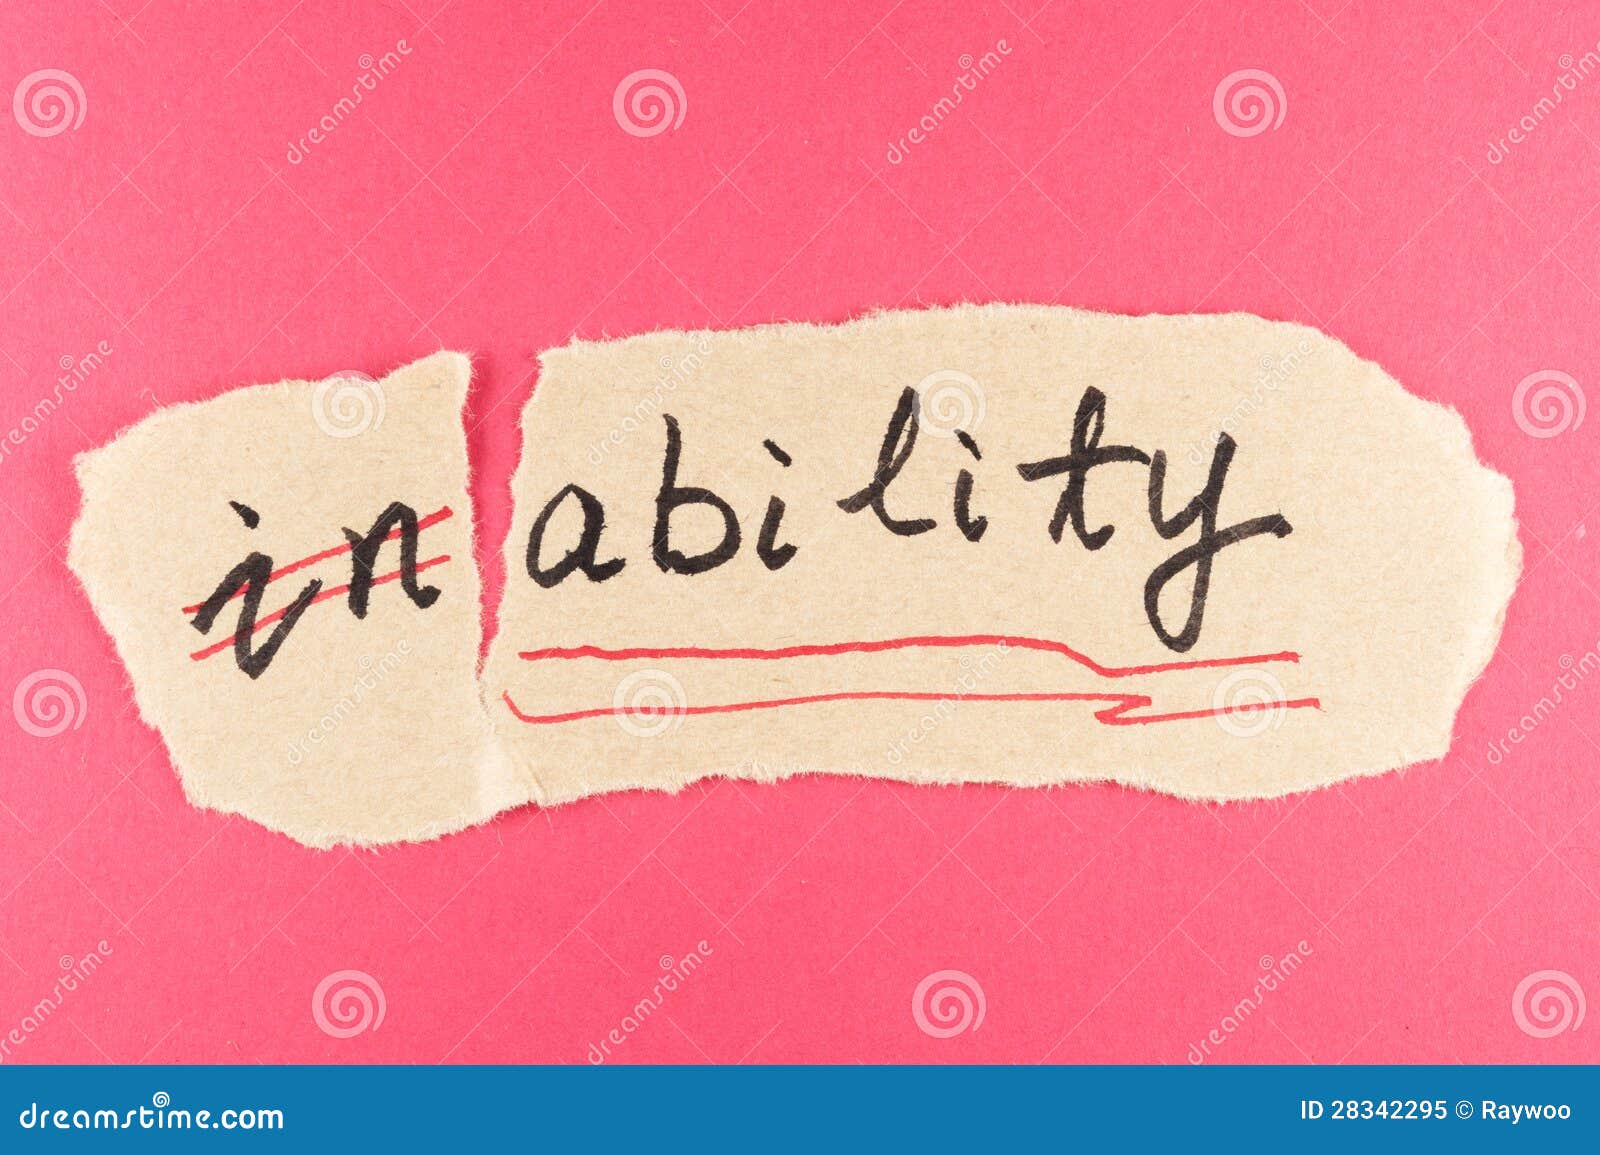 inability to ability